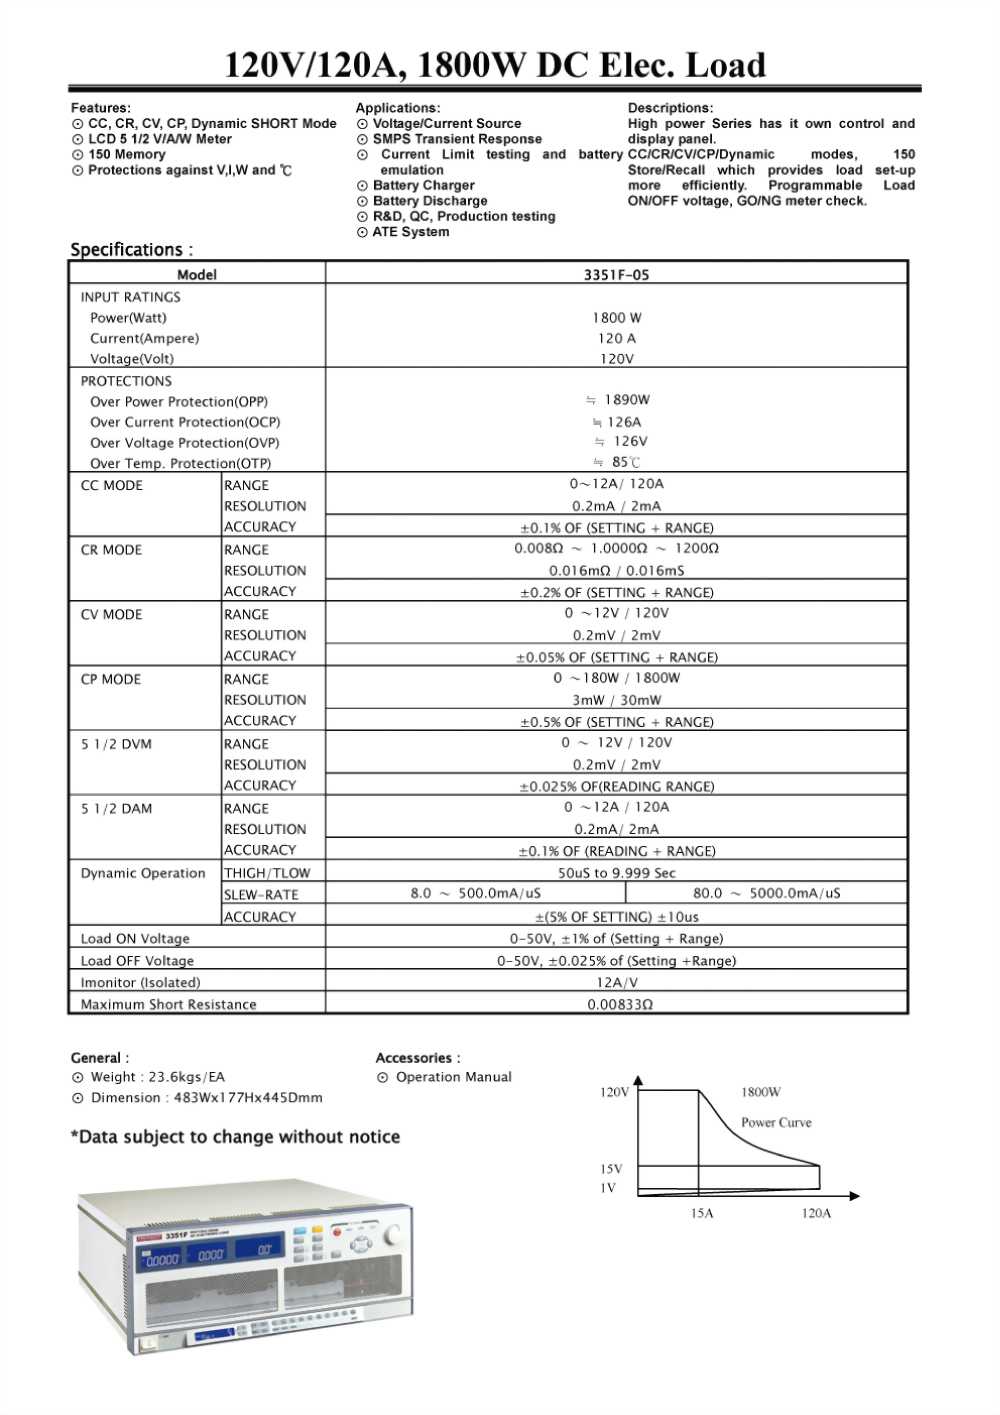 3351f-05-high-power-dc-electronic-load-specifications.jpg